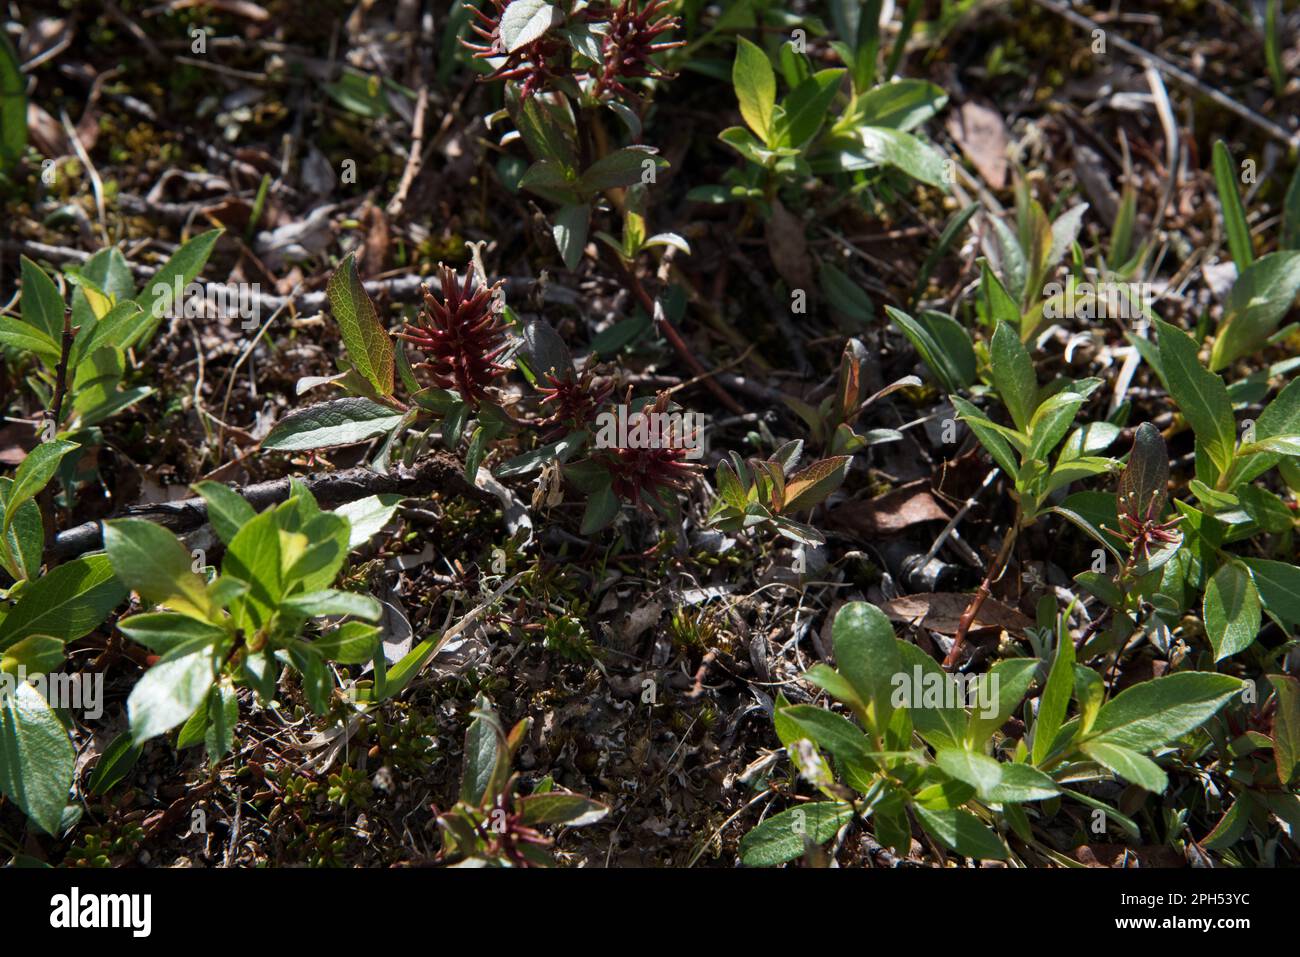 Bartsia allpina flowering on Dovrefjell which is a mountain range and highland in central Norway. Stock Photo